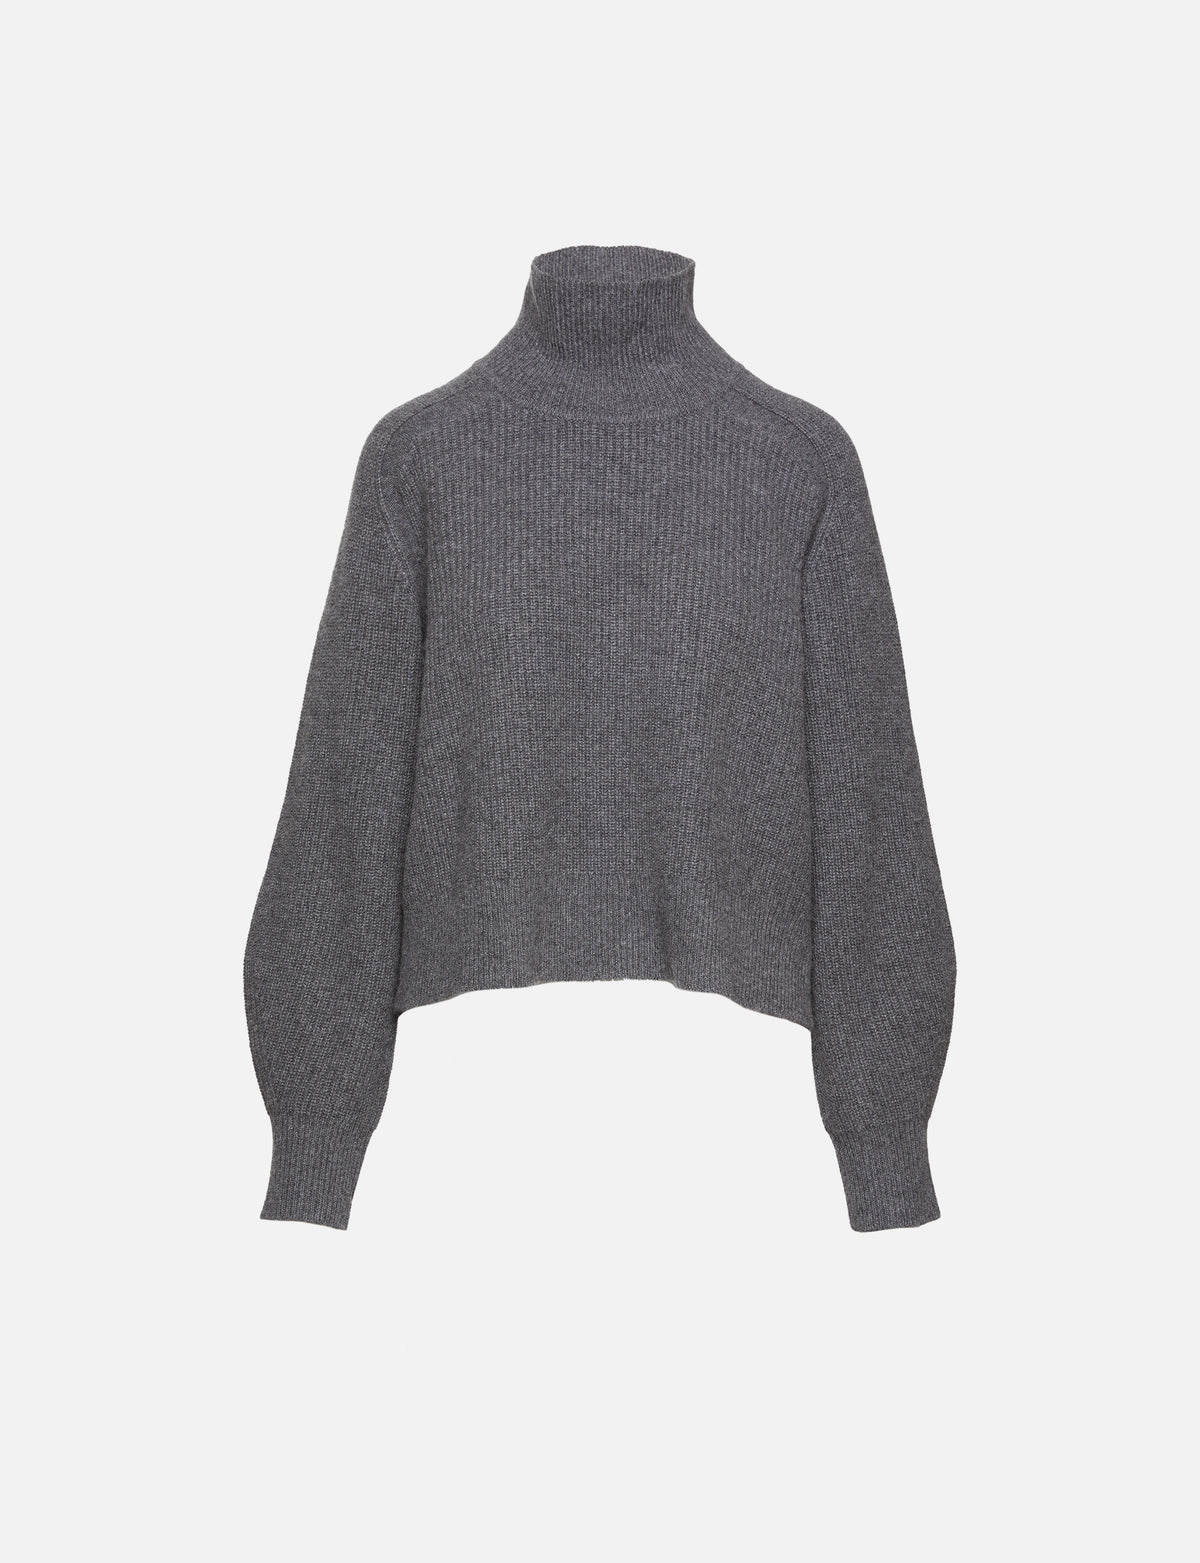 view 1 - Cropped Turtleneck Sweater